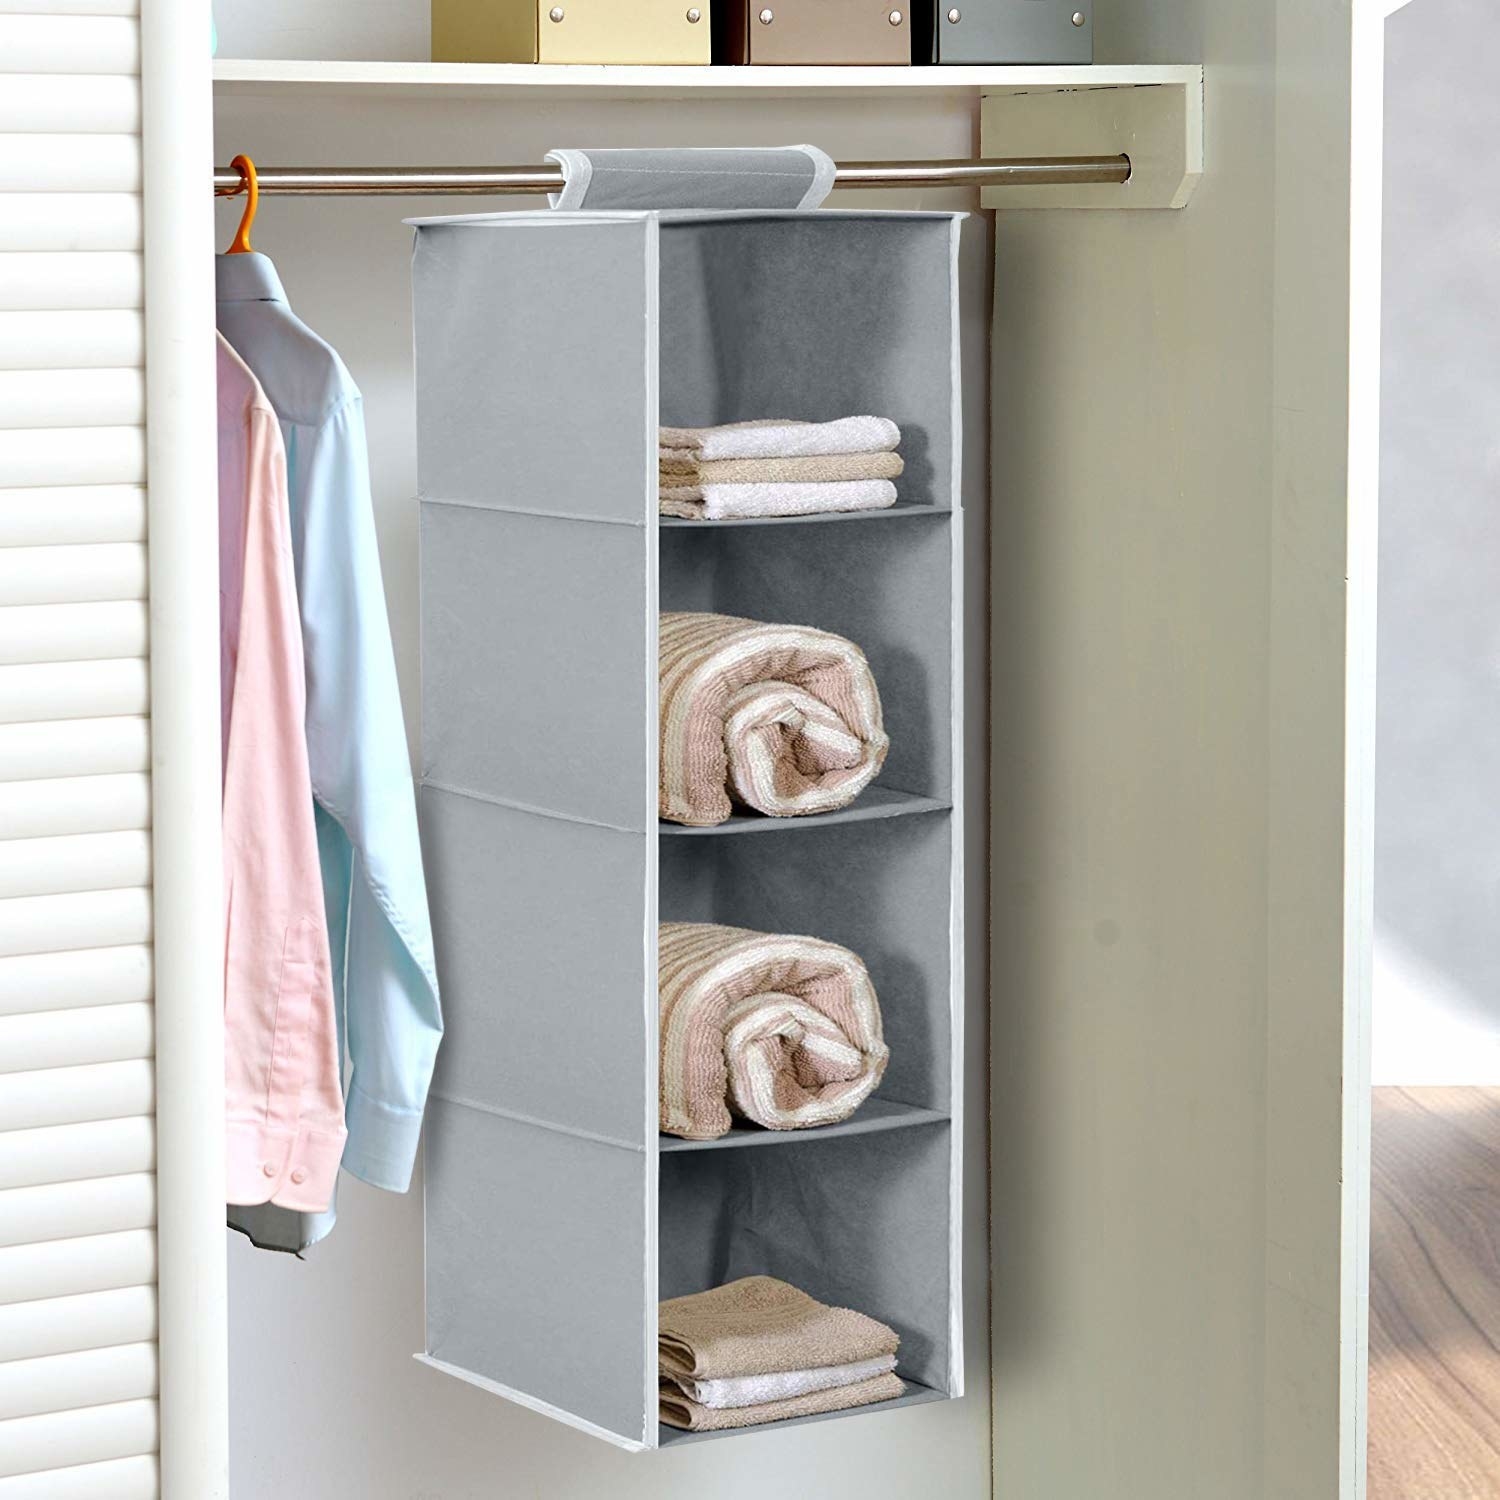 A hanging organiser with clothes in it